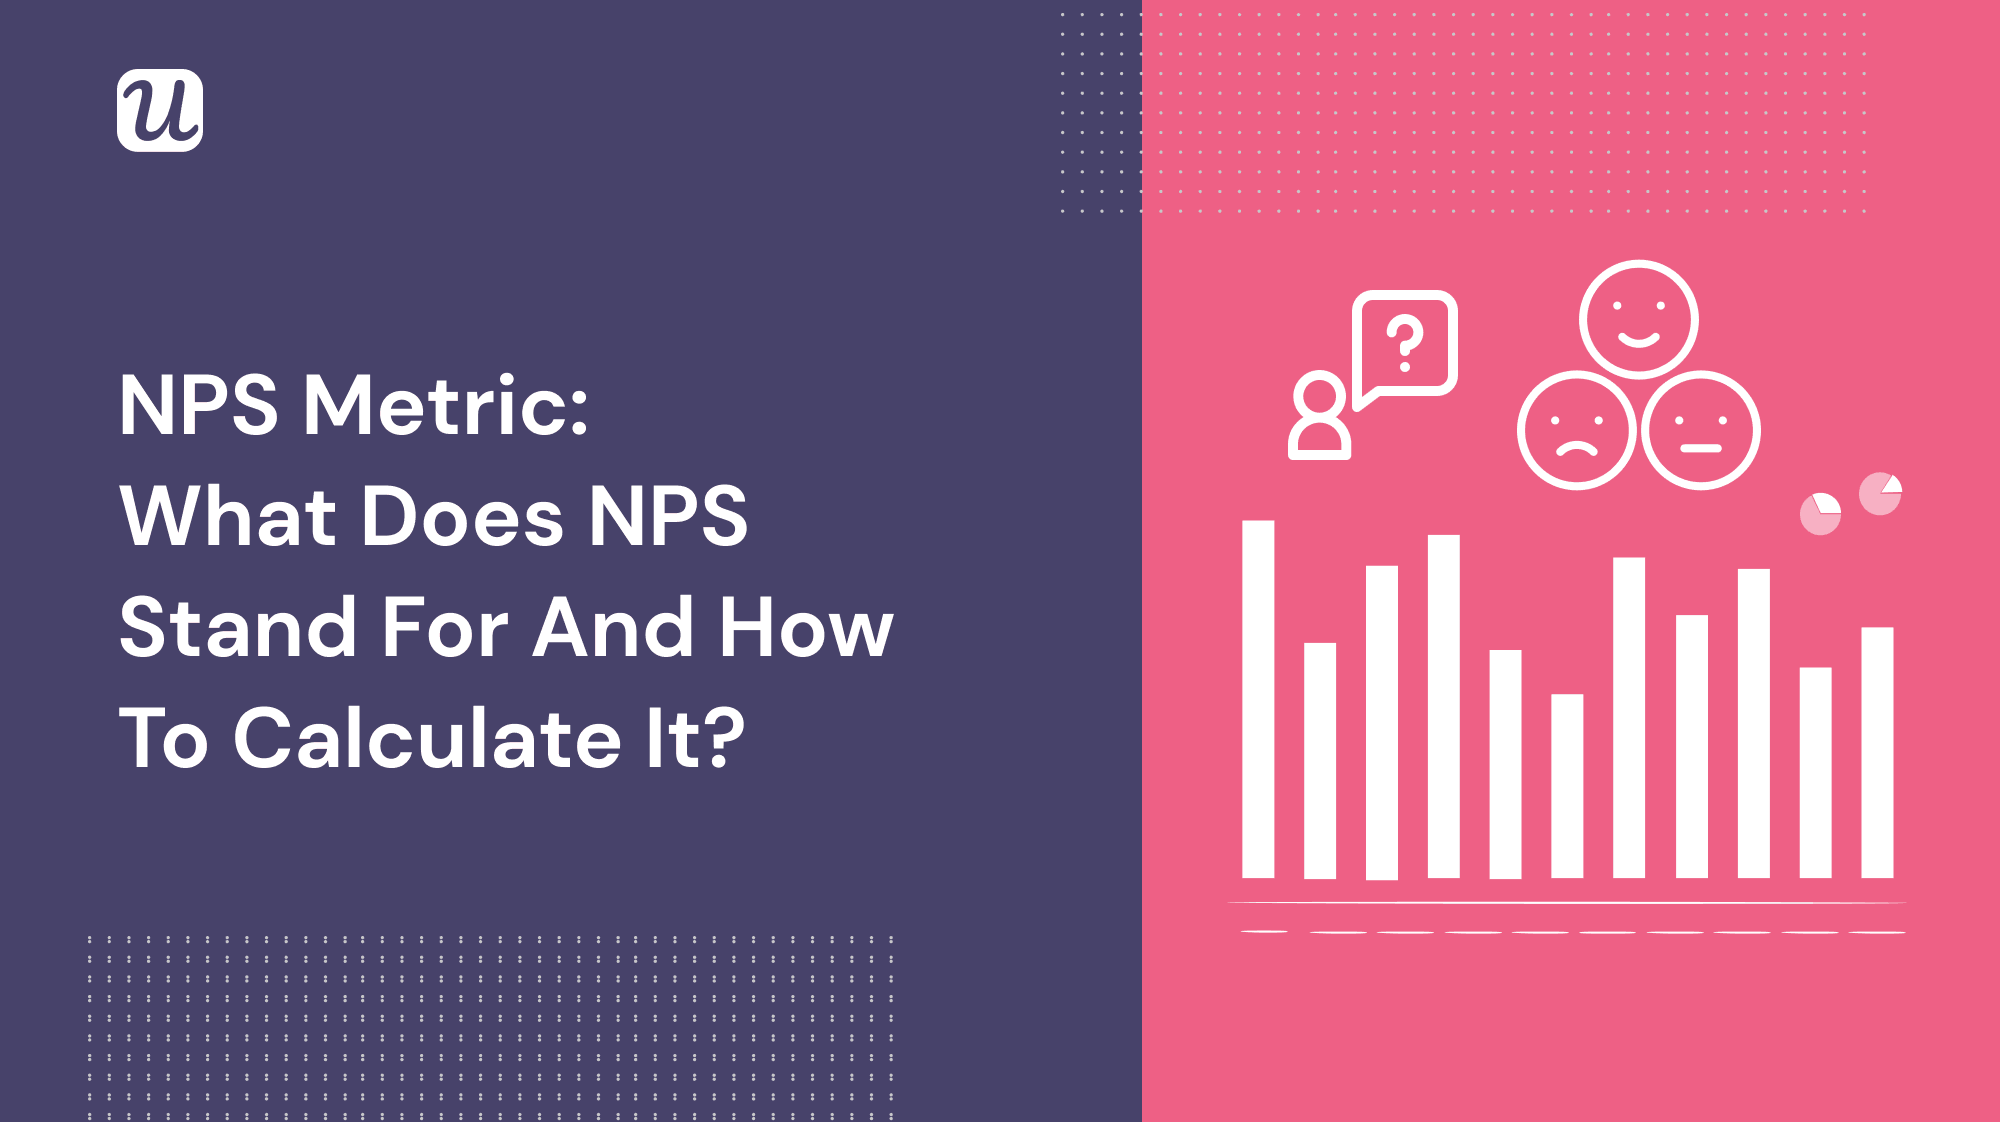 NPS Metric: What Does NPS Stand For And How To Calculate It?